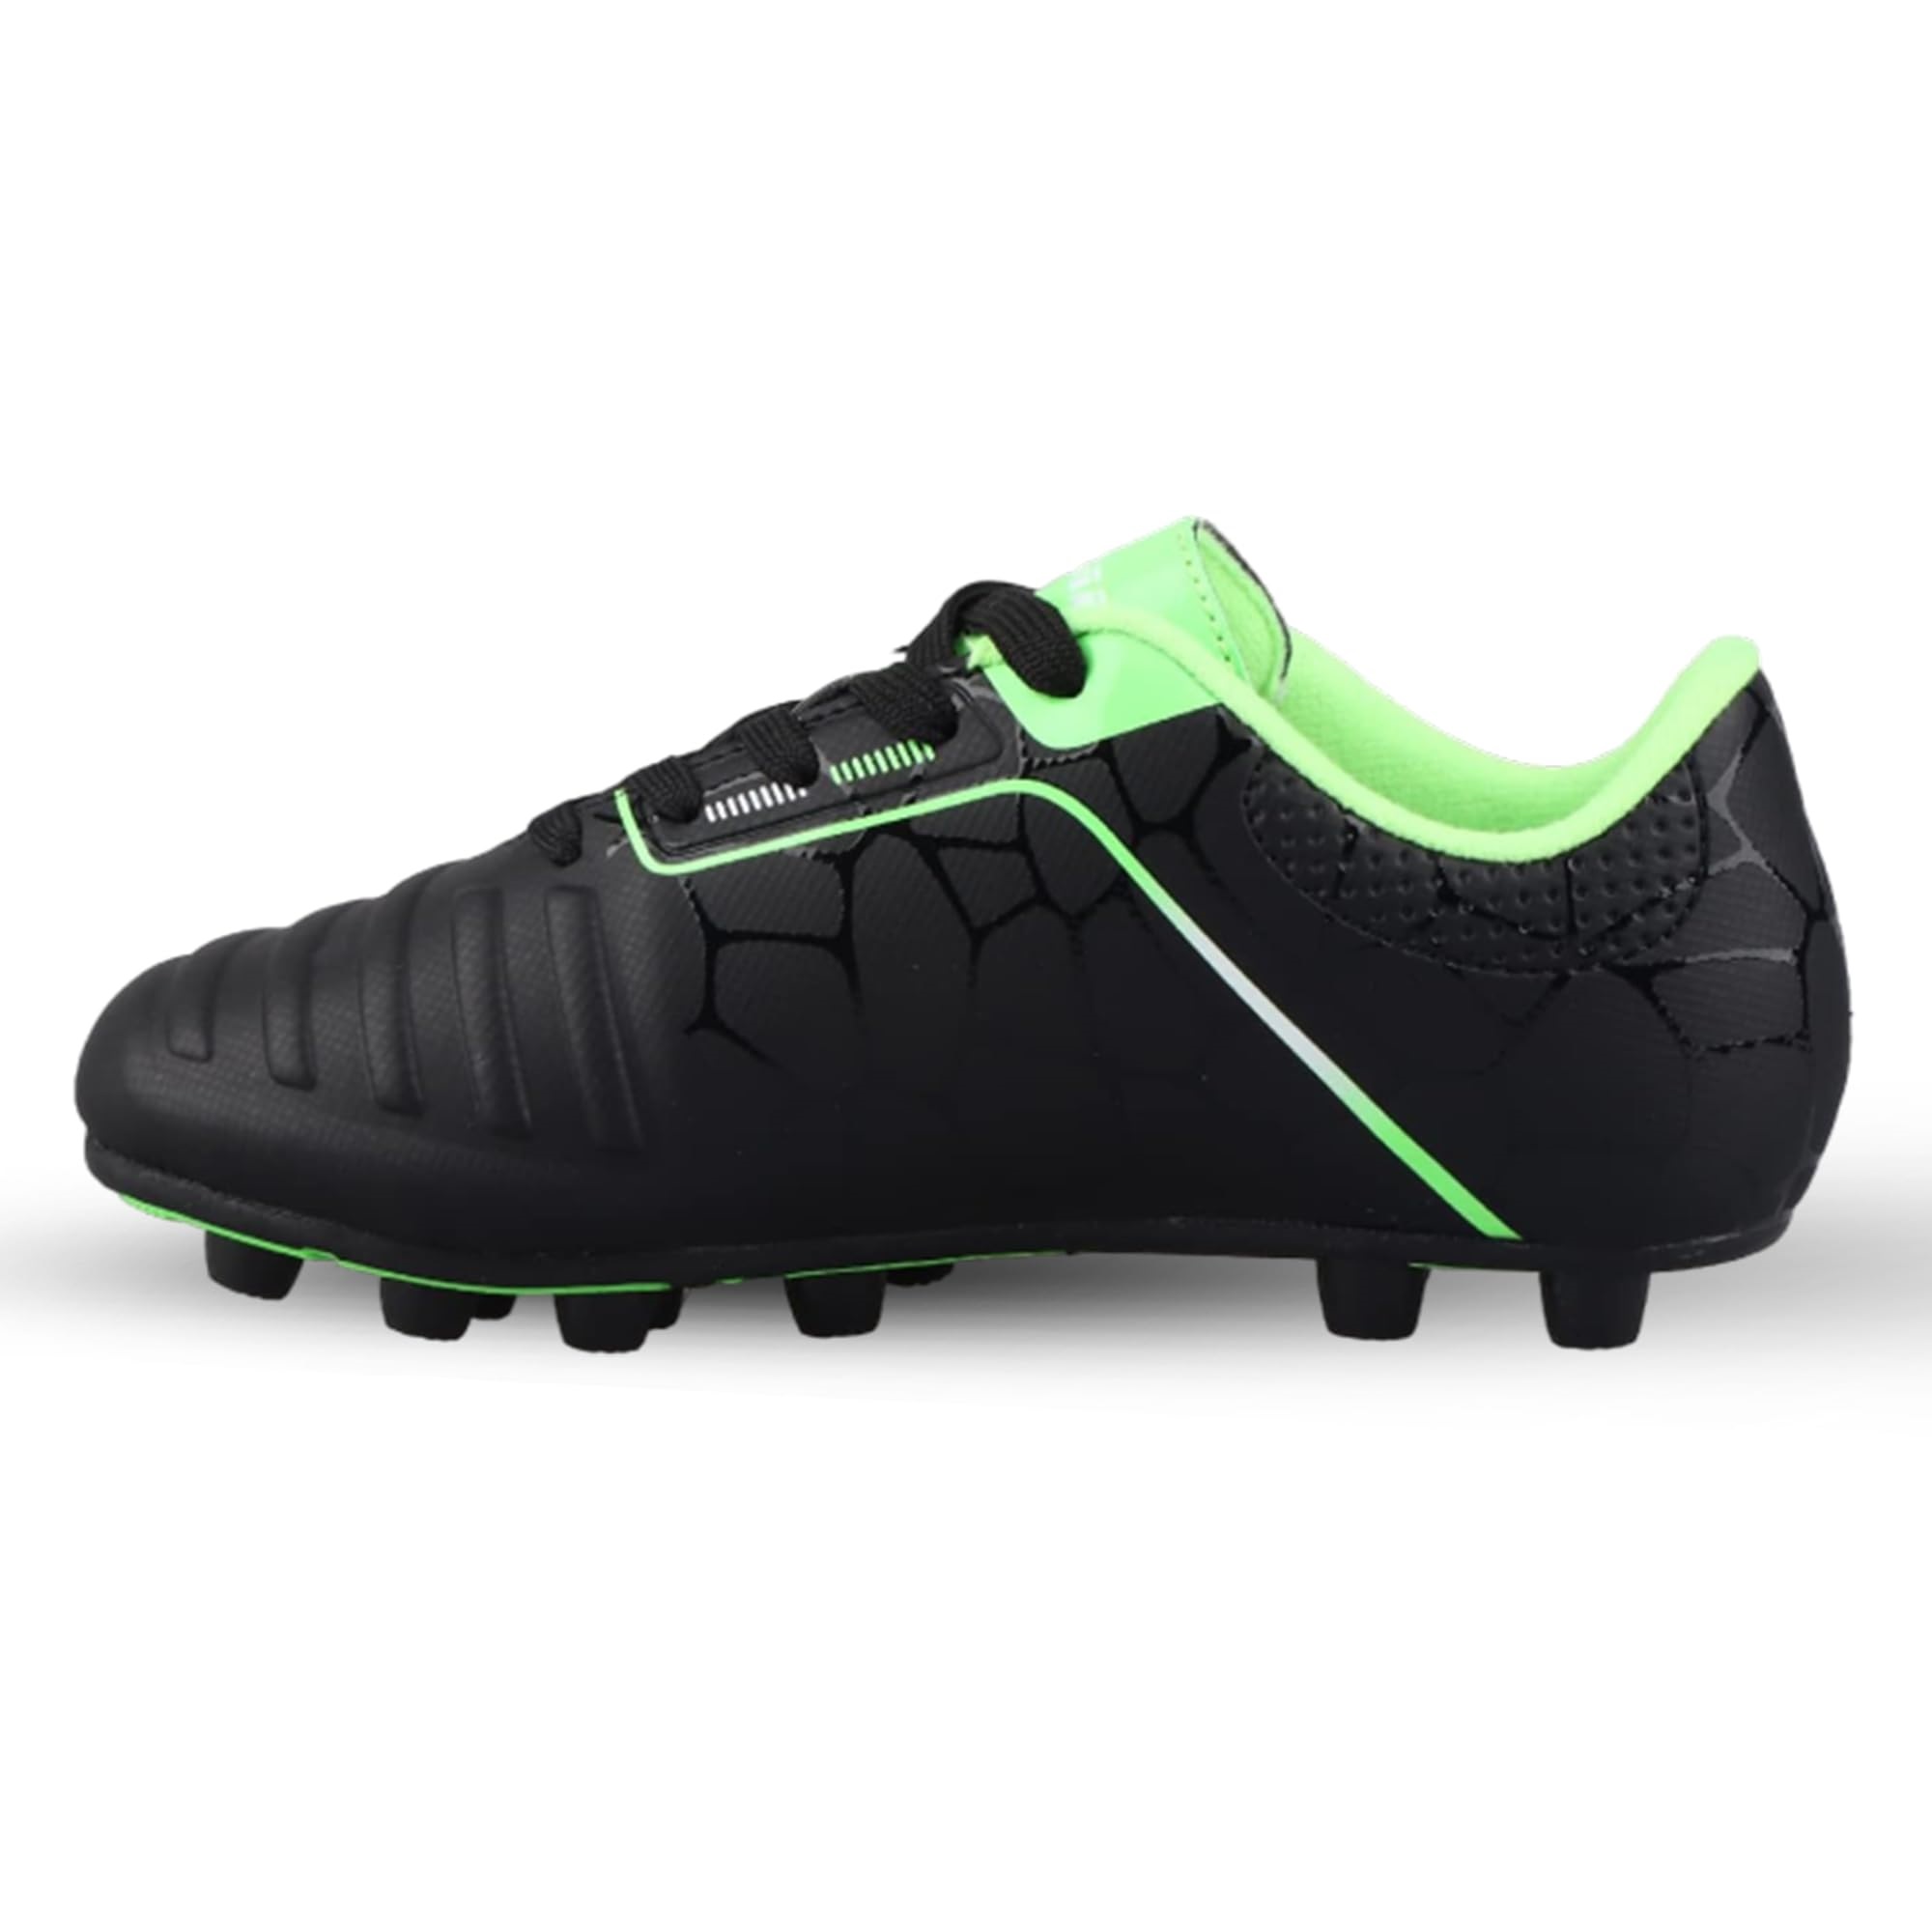 Vizari Kids Catalina JR FG Outdoor Firm Ground Soccer Shoes/Cleats  for Boys and Girls (Black/Green/White, 10.5 Little Kid)